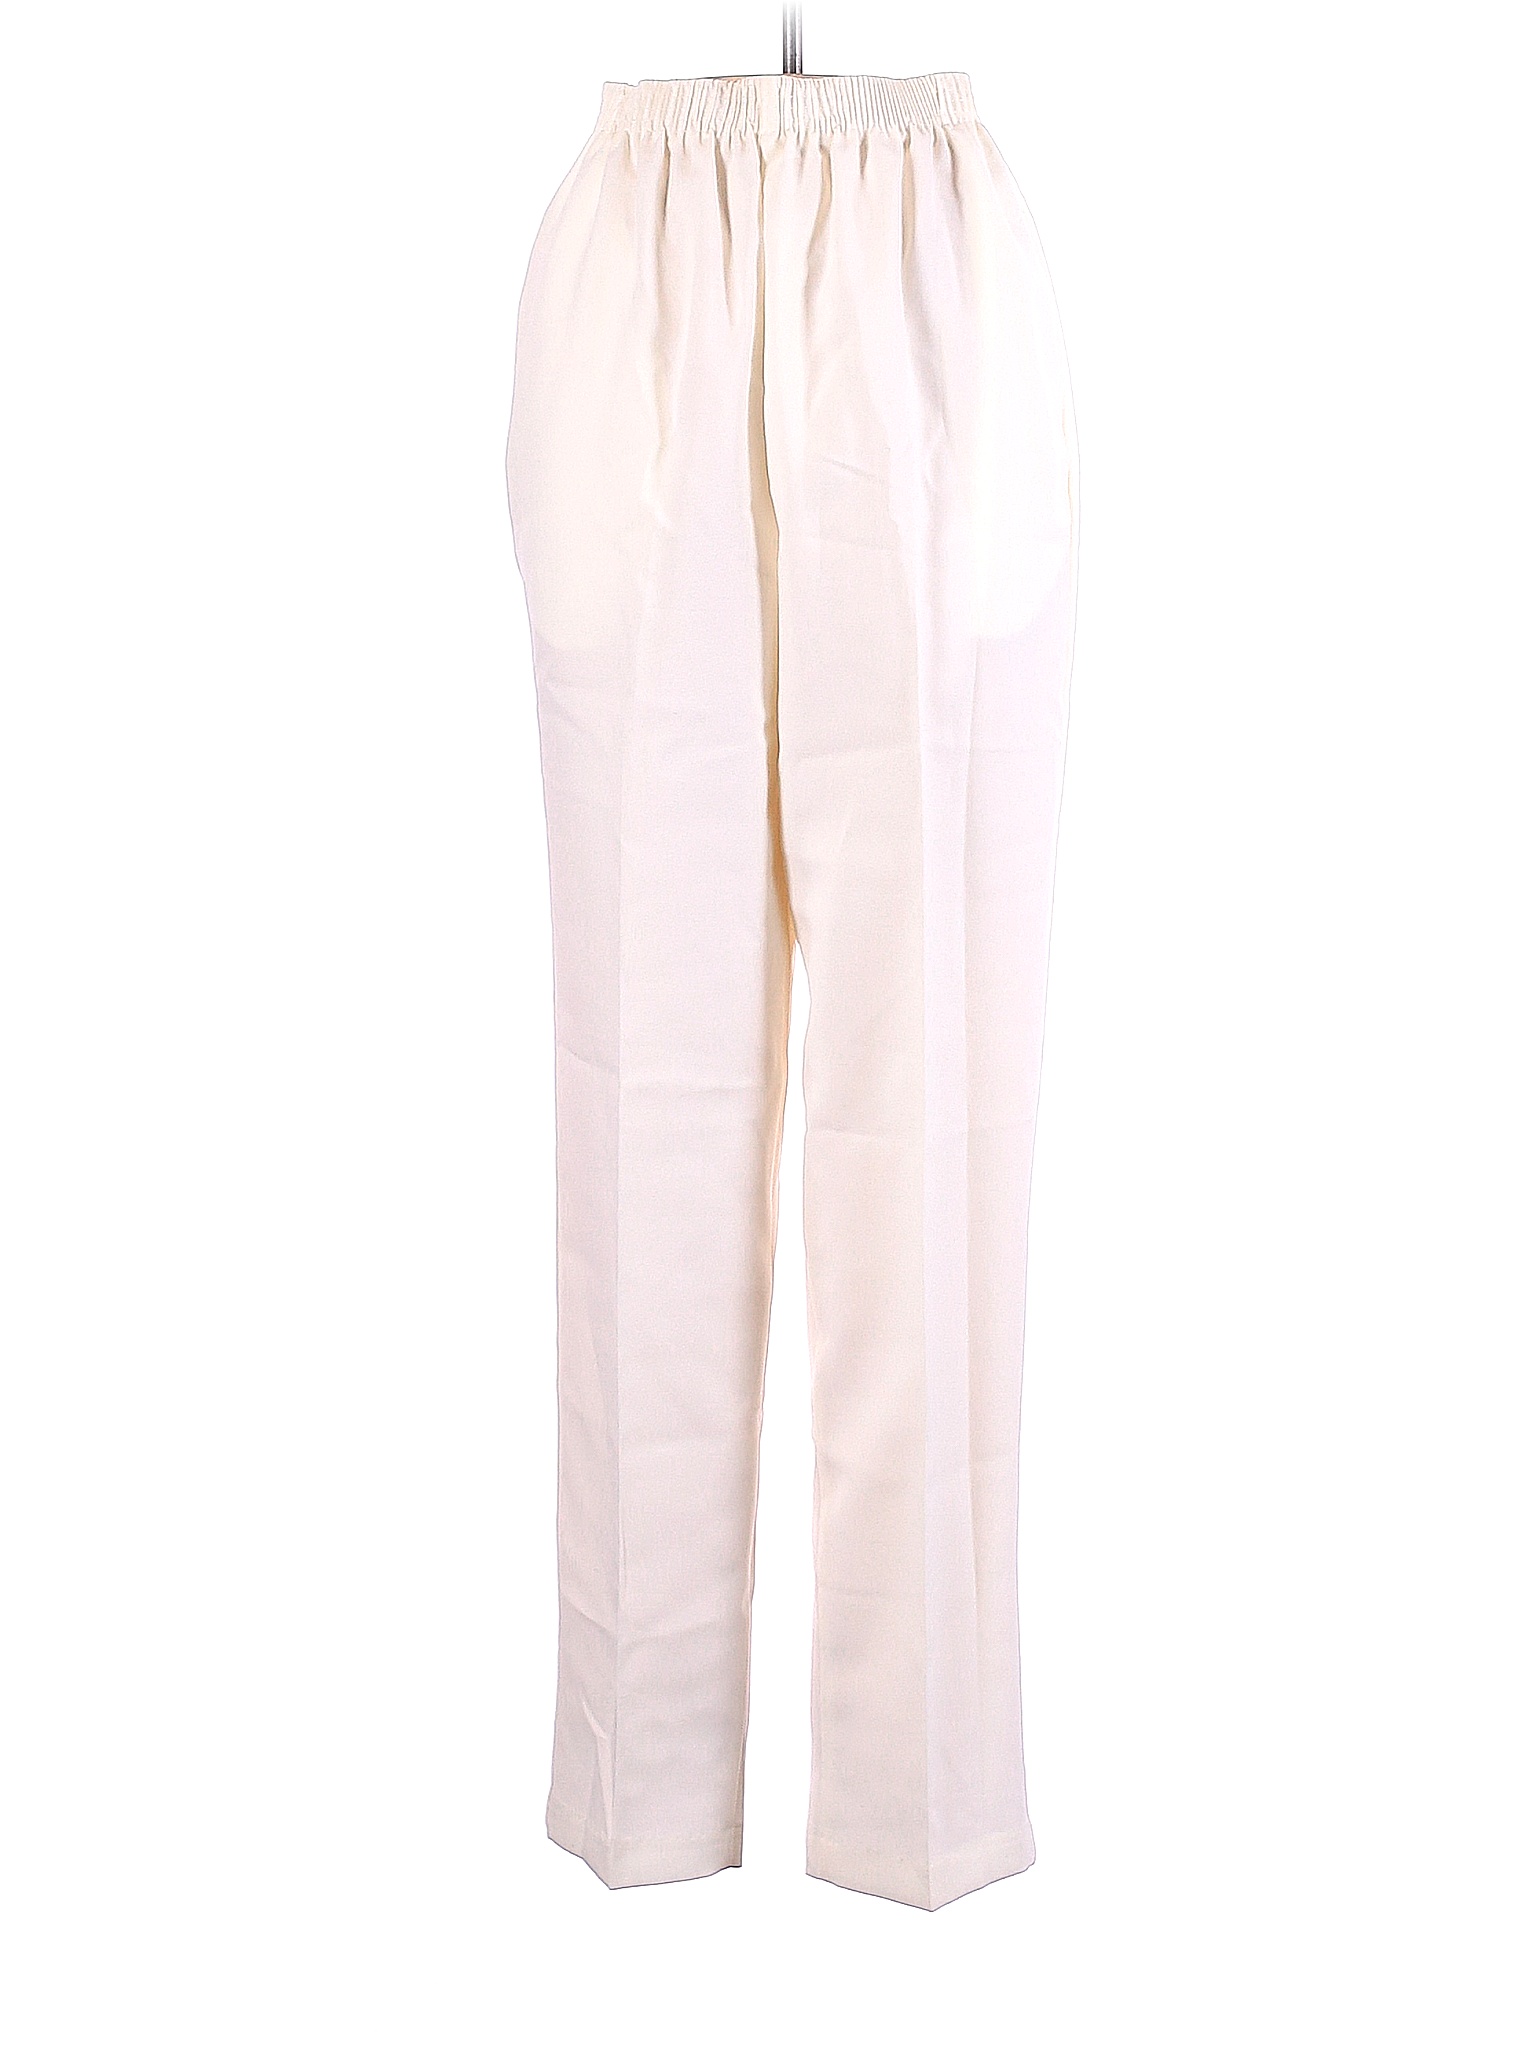 BonWorth 100% Polyester Solid Pink Ivory Casual Pants Size XS - 66% off ...